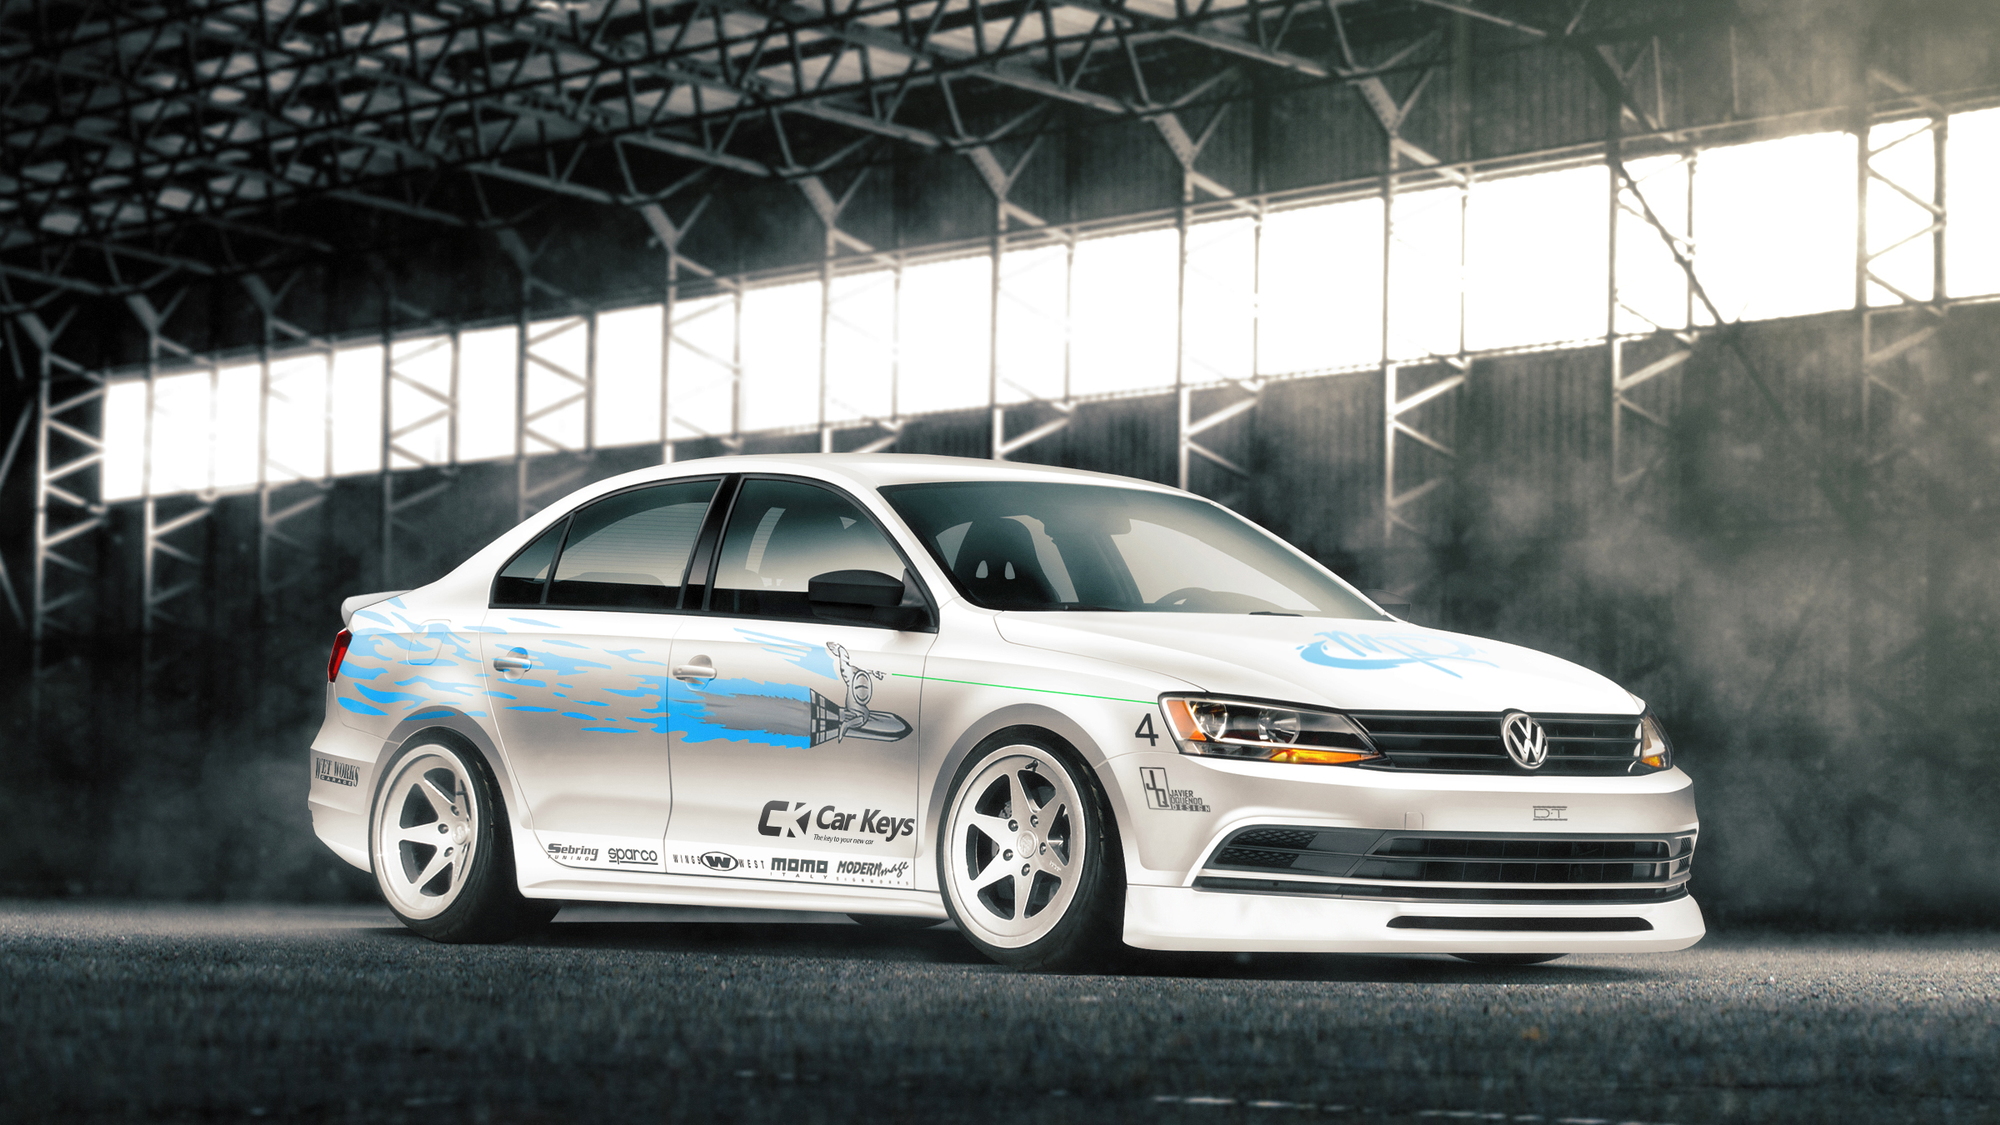 Volkswagen Jetta Fast and Furious livery